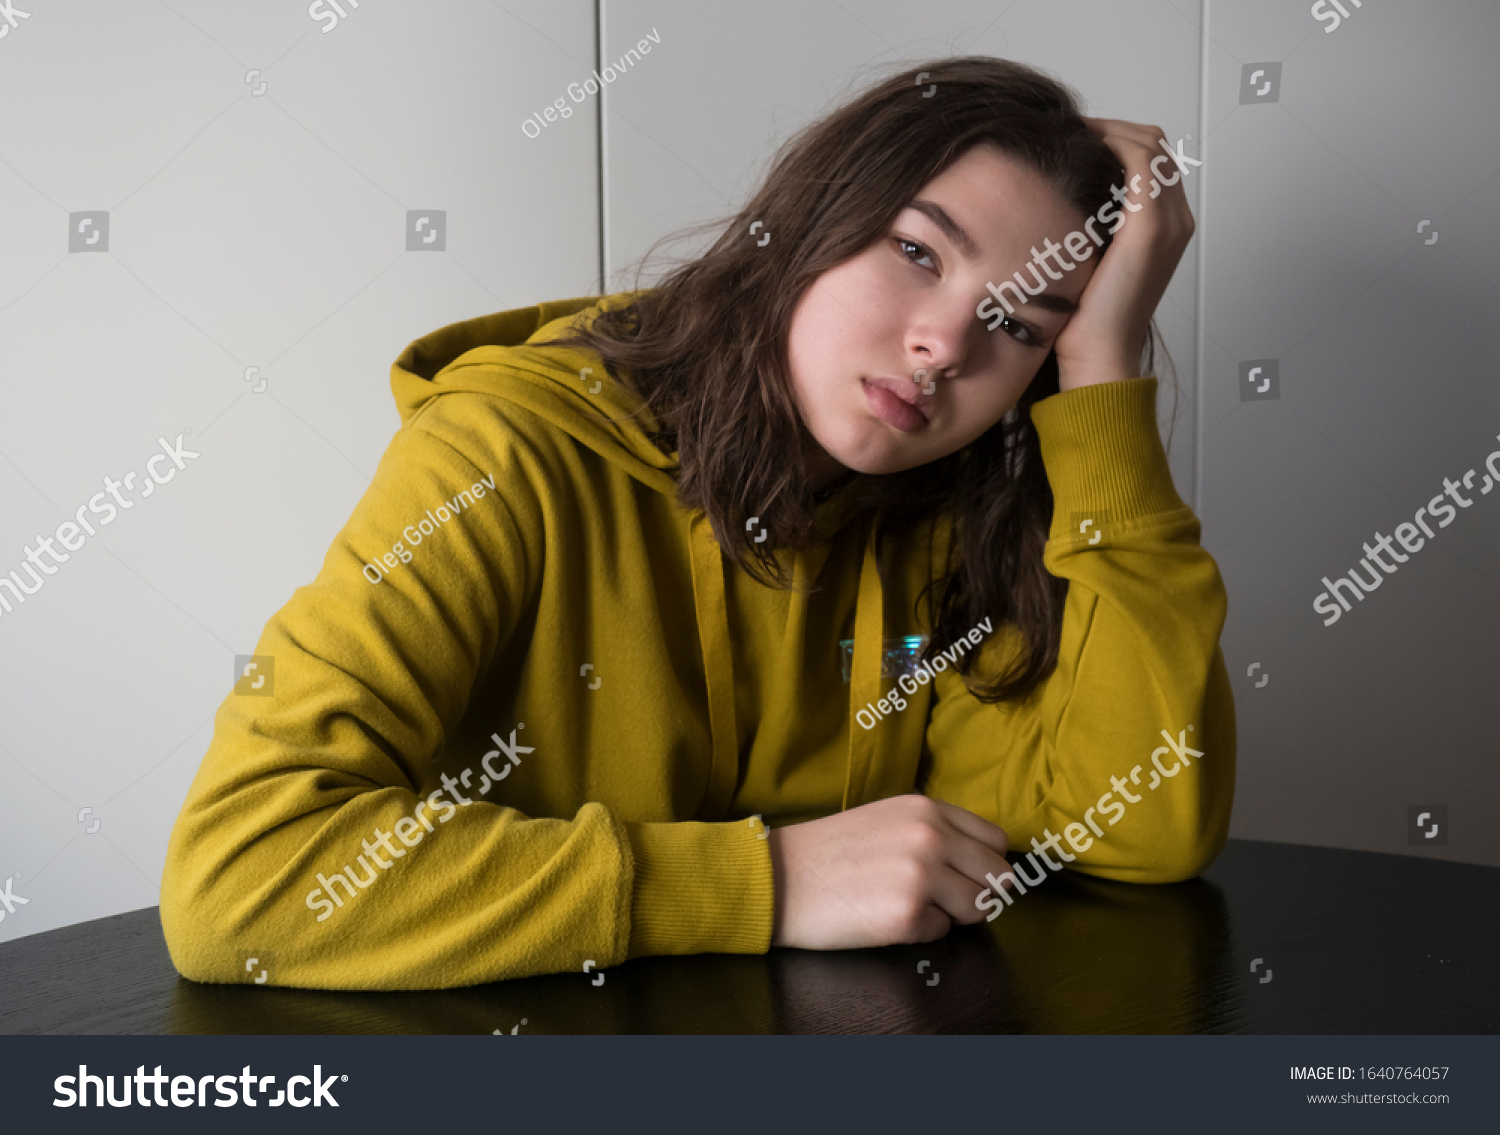 Sad unhappy tired teenager girl sitting at table in room #1640764057